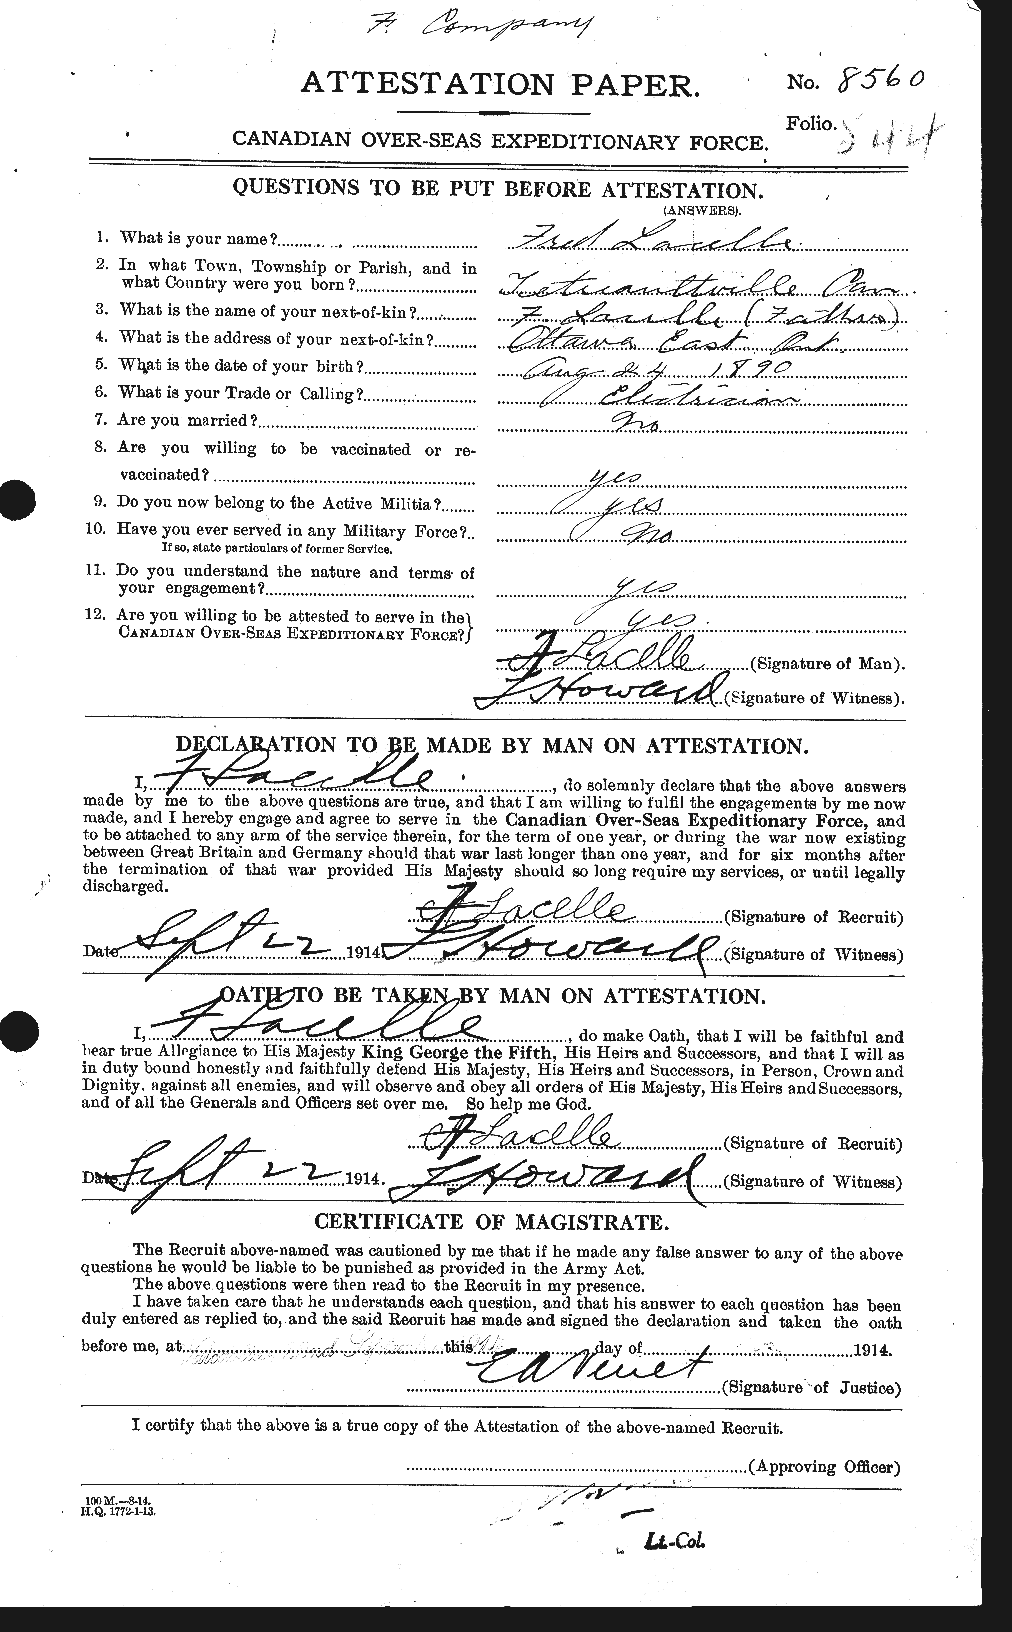 Personnel Records of the First World War - CEF 444433a